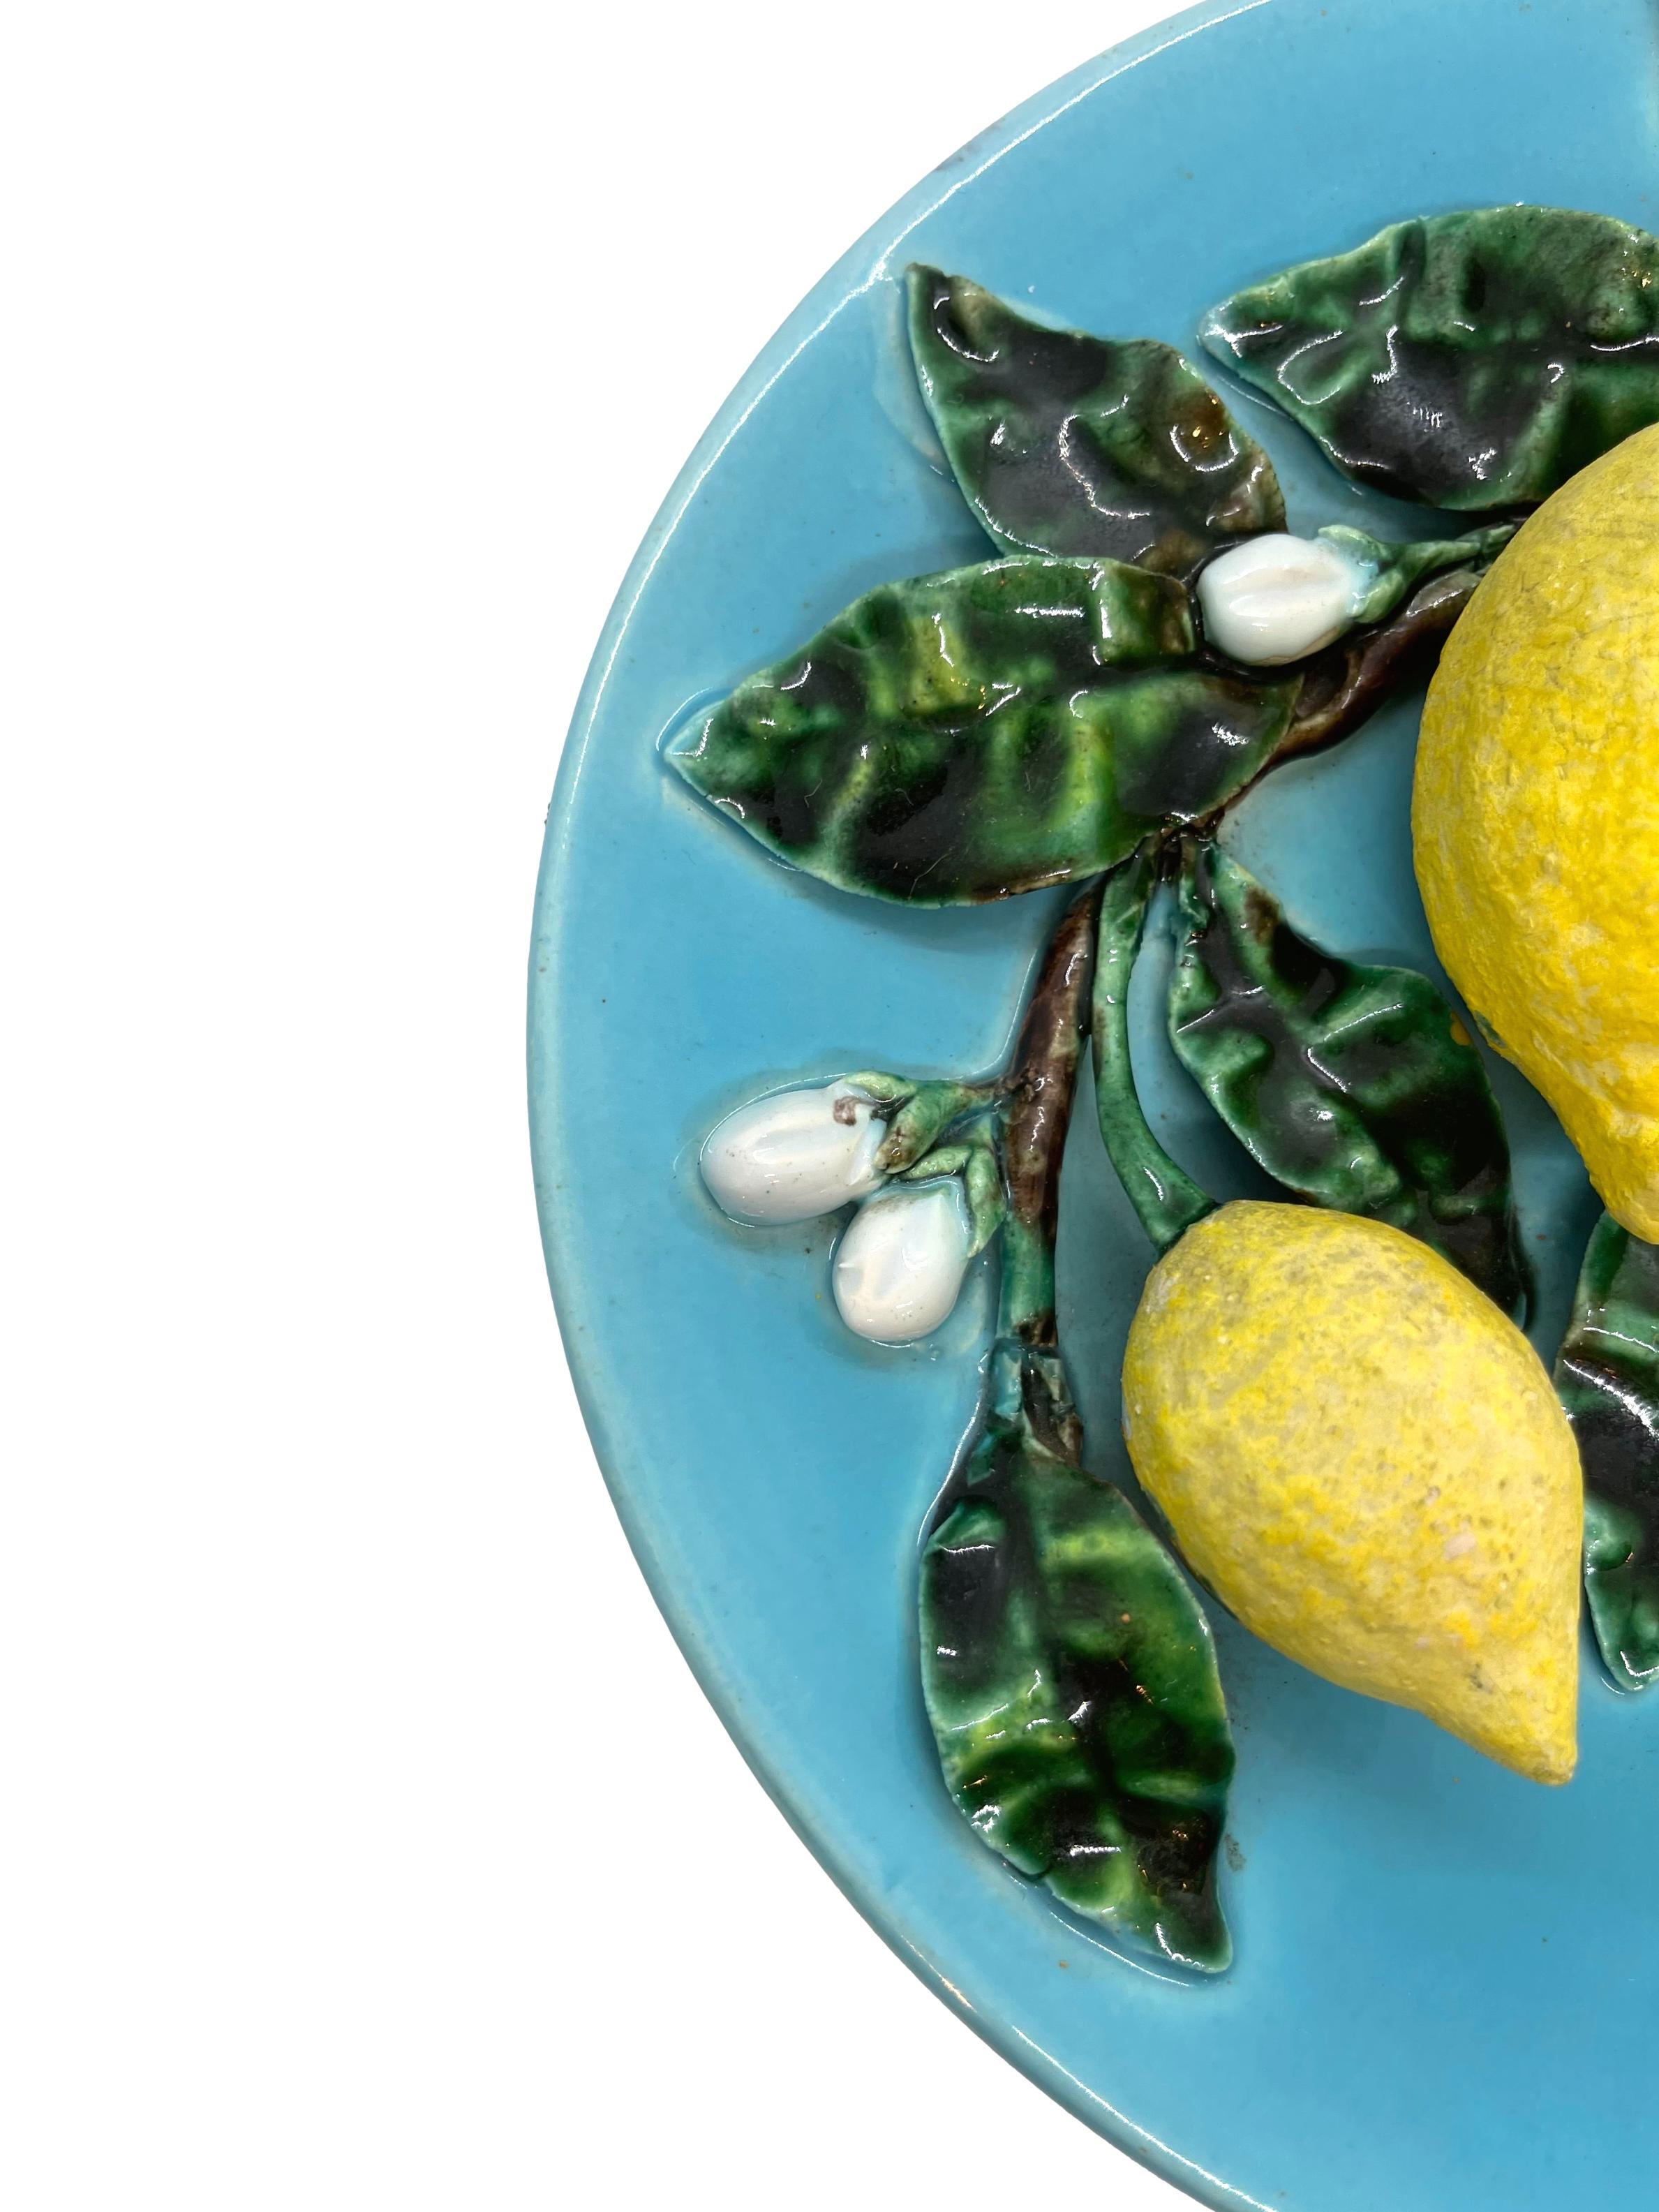 Victorian French Majolica Trompe L'oeil Wall Plaque with Lemons, Perret-Gentil, Menton